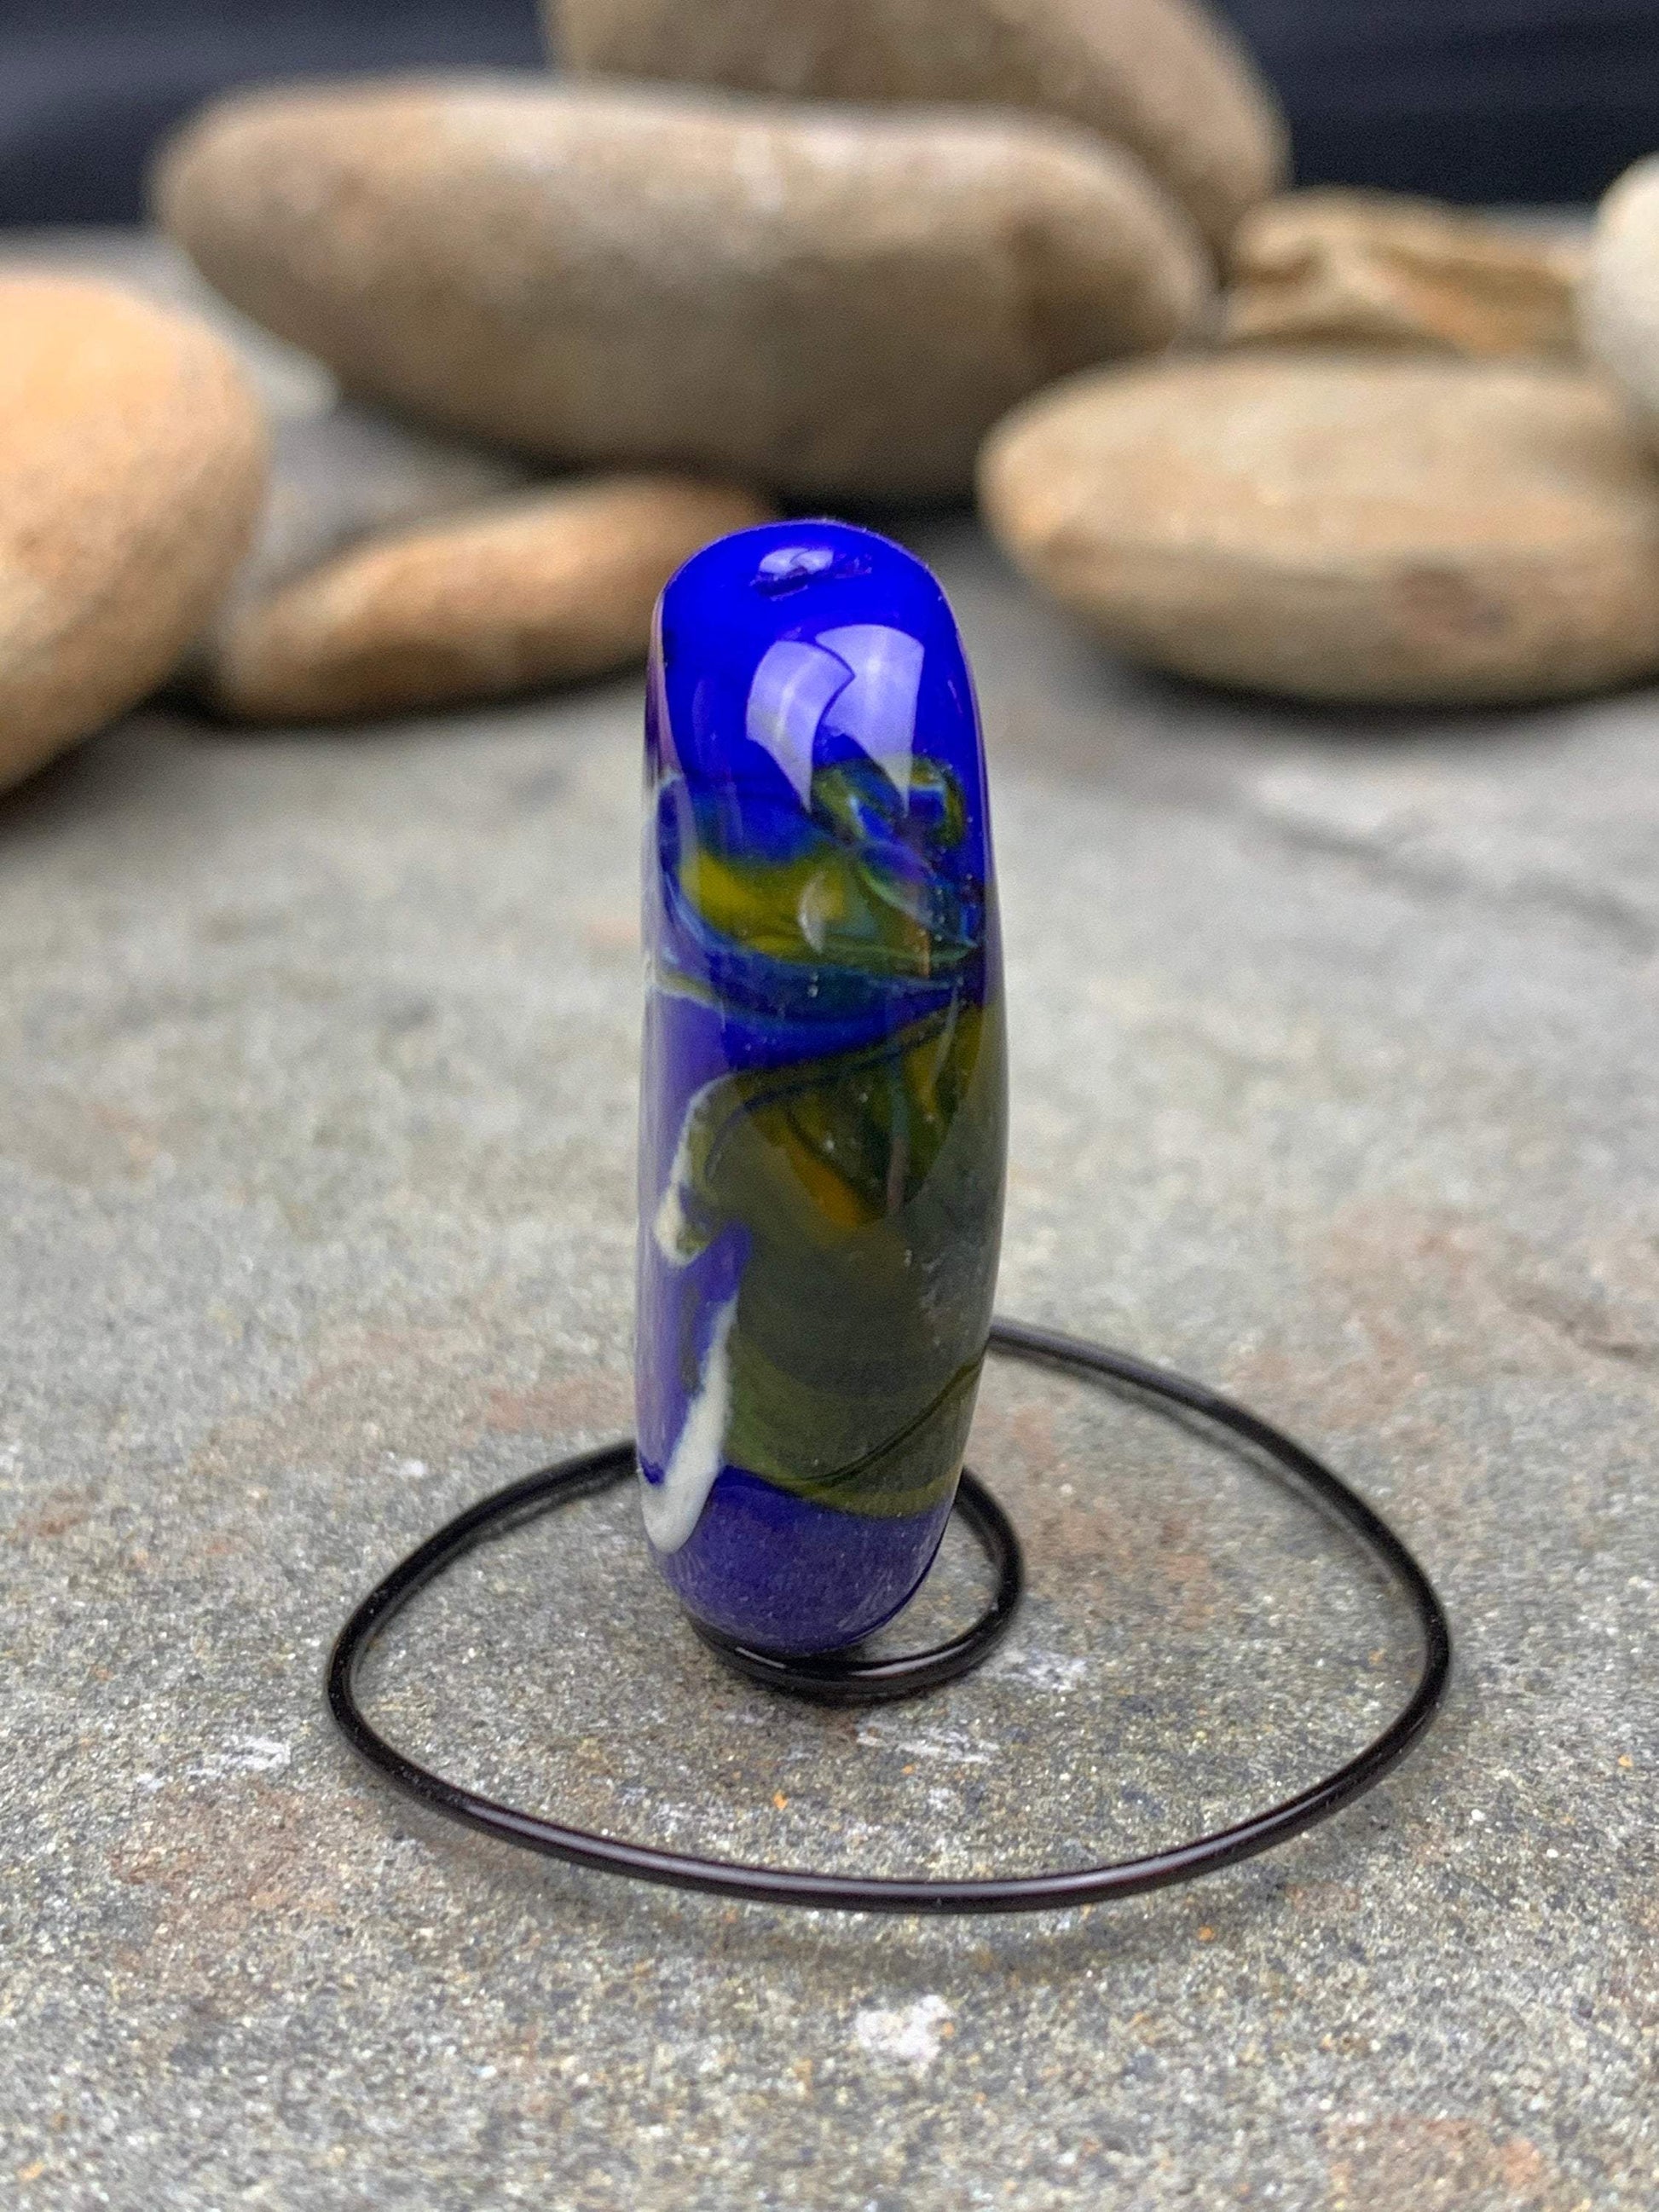 a handmade lampworked glass bead with blue and white dots on a green background